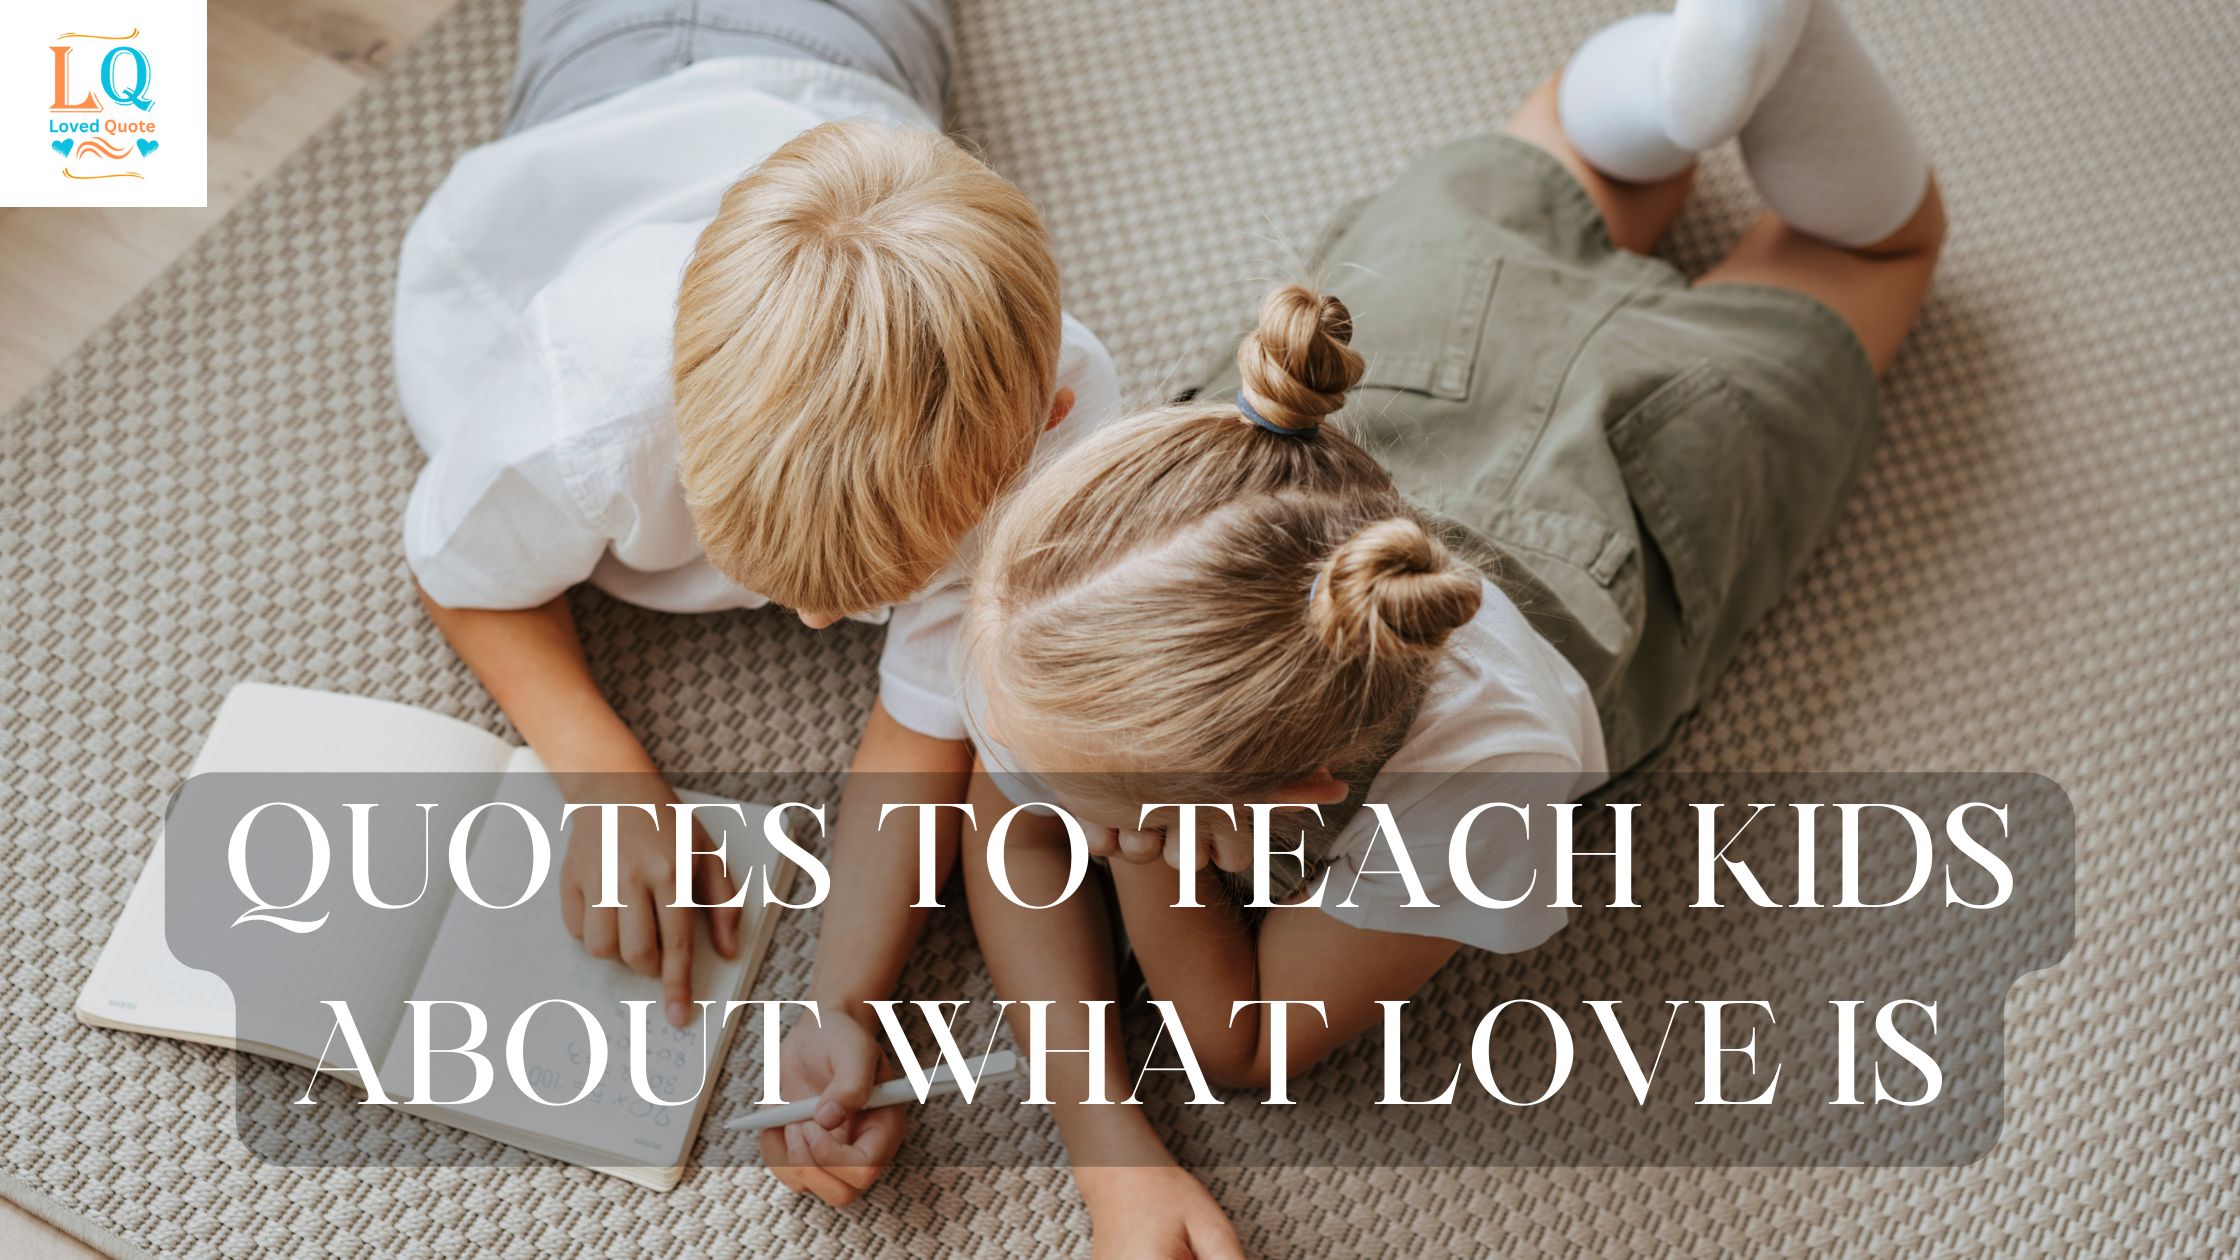 Quotes to Teach Kids About What Love Is